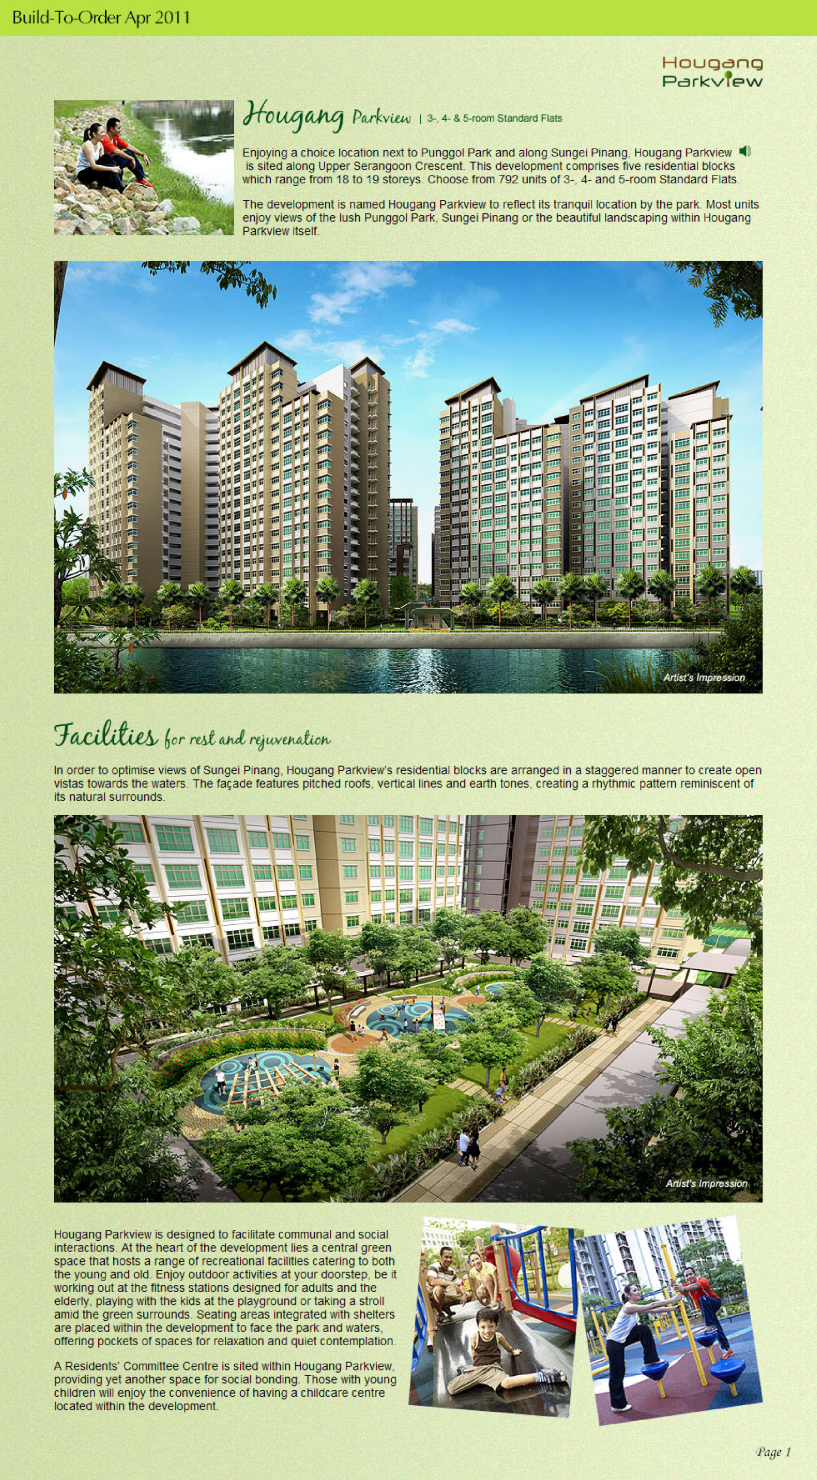 HDB Hougang Parkview BTO launched in April 2011 site plan